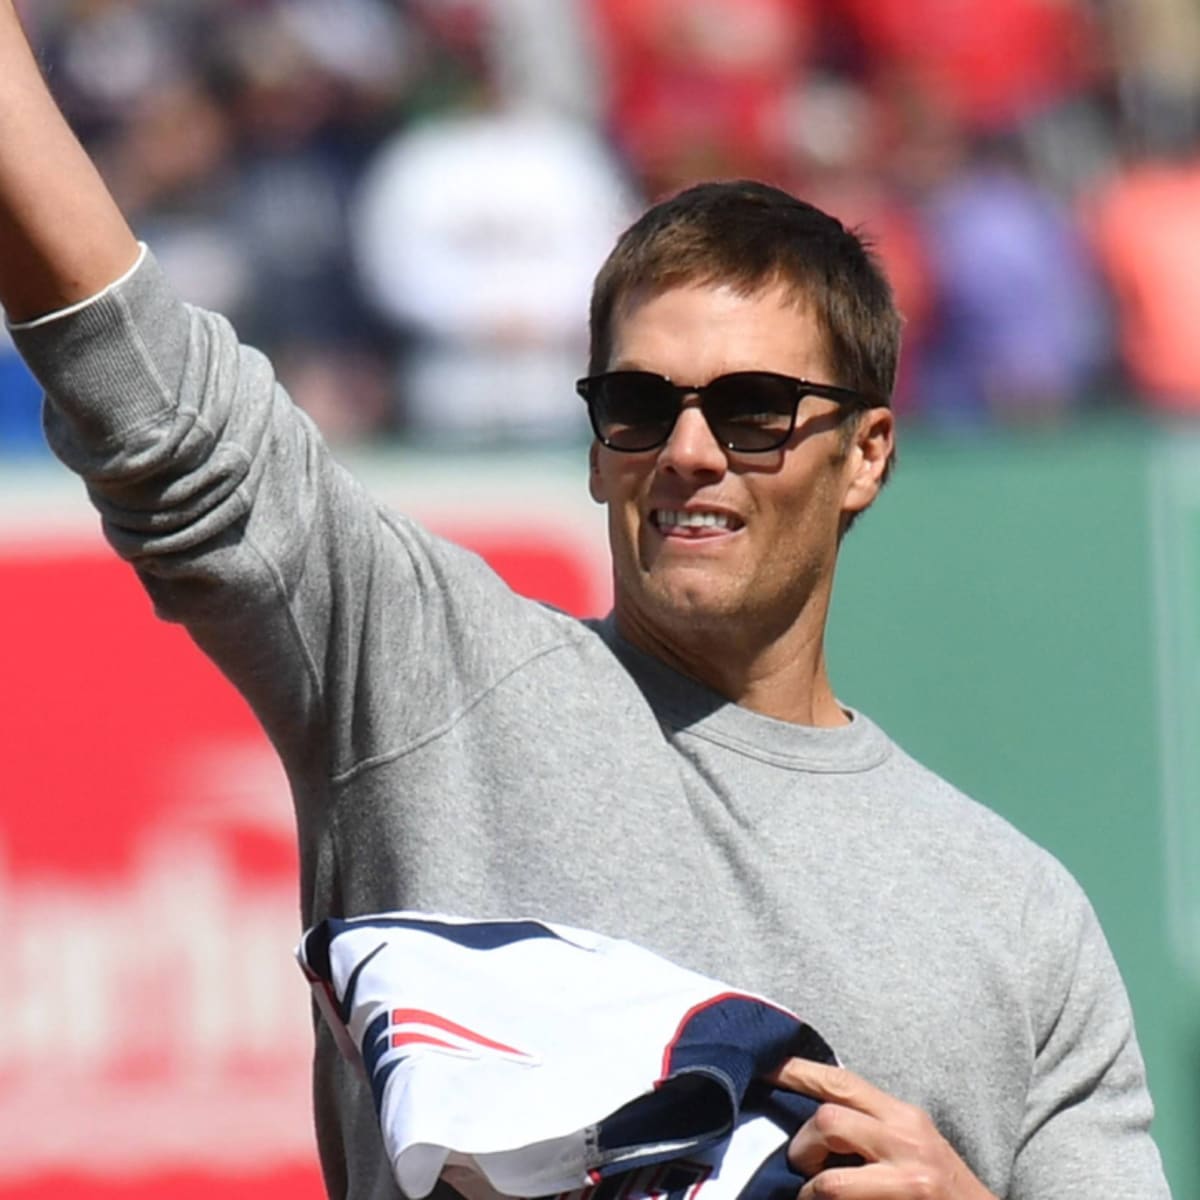 MLB Franchise That Drafted Tom Brady Reacts to His Retirement